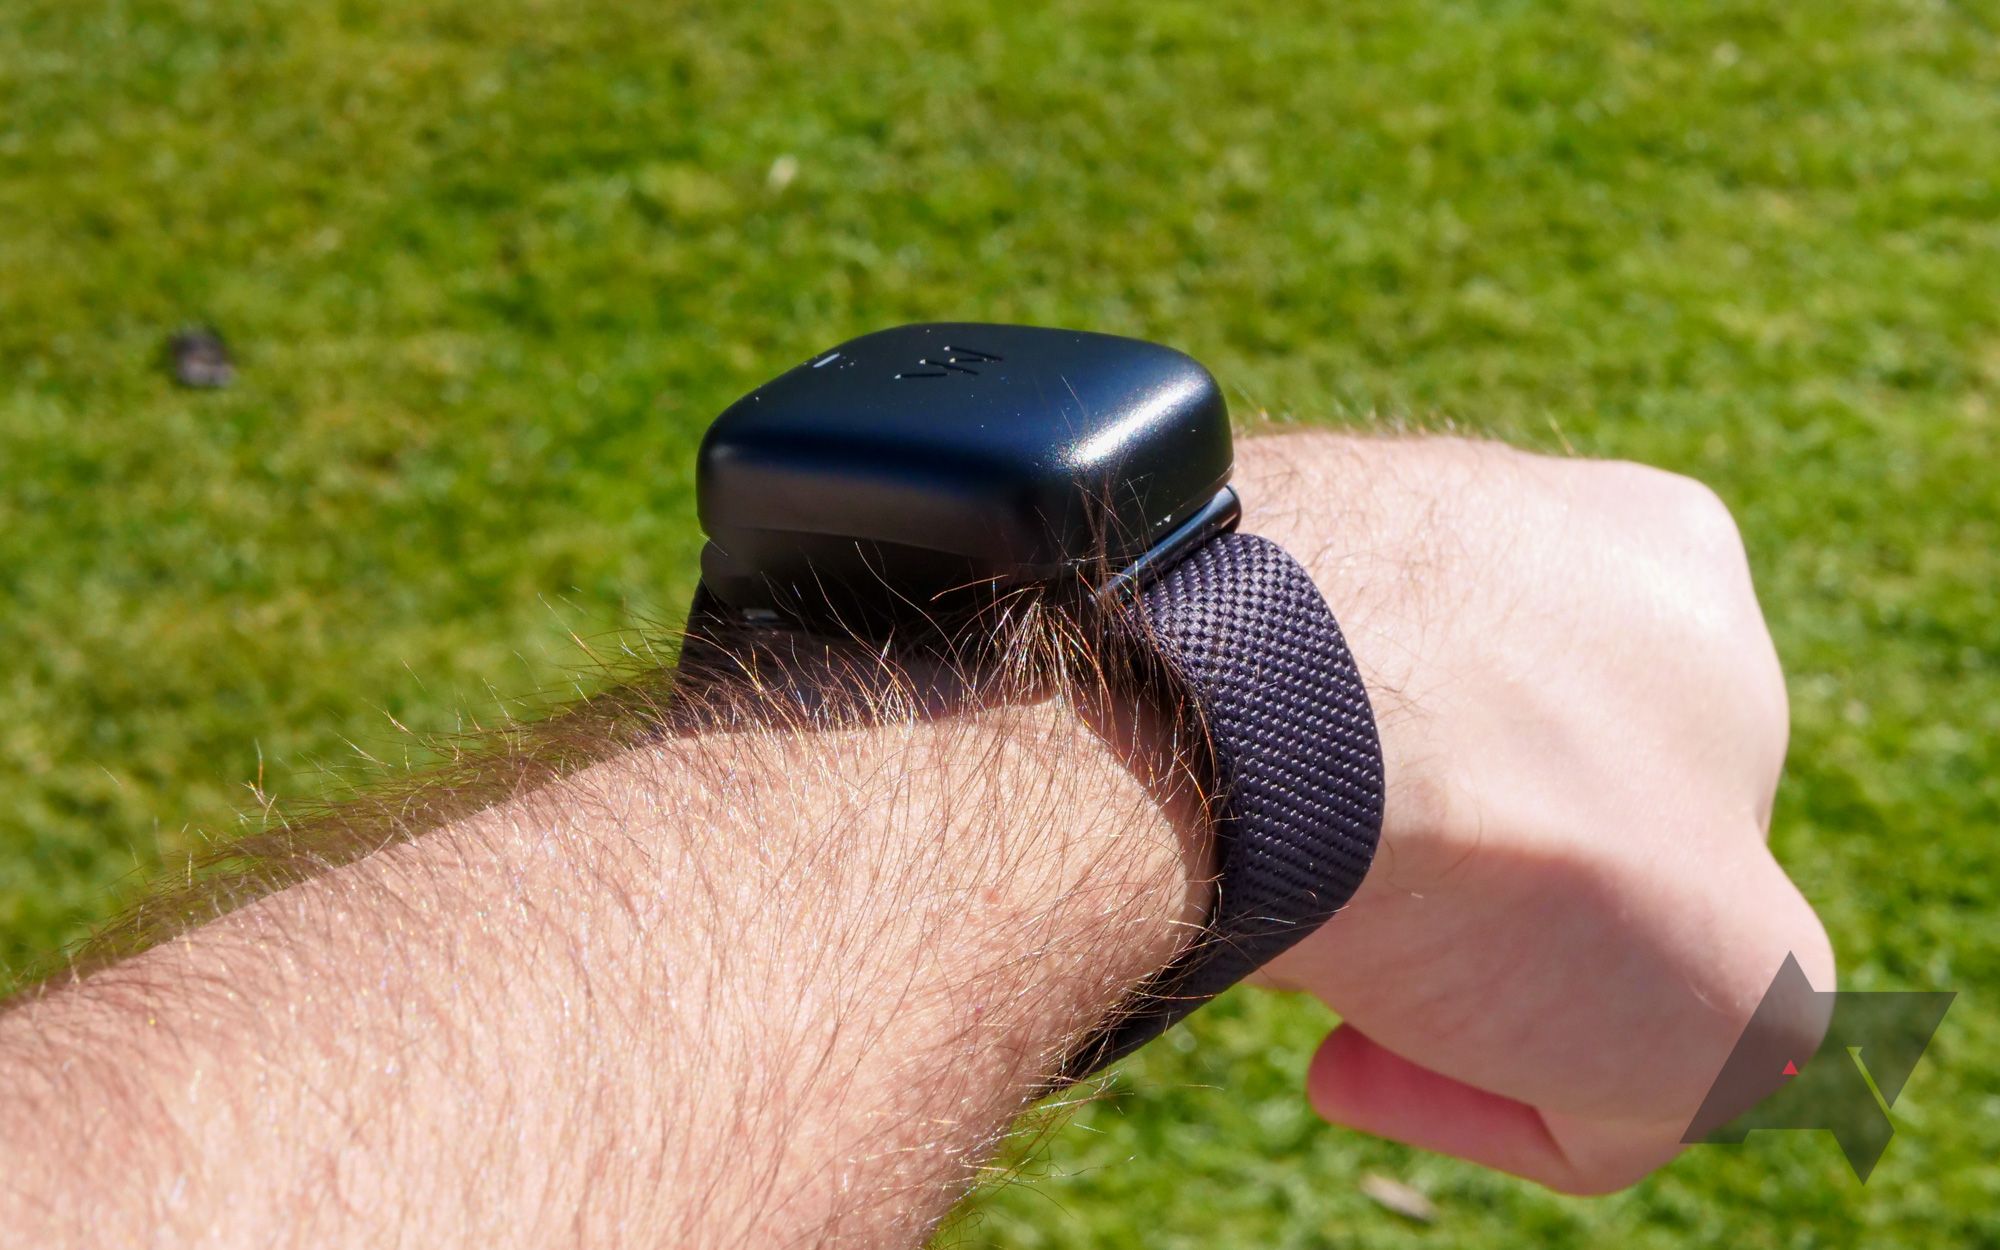 WHOOP 4.0 review: the best fitness tracker by a wide margin